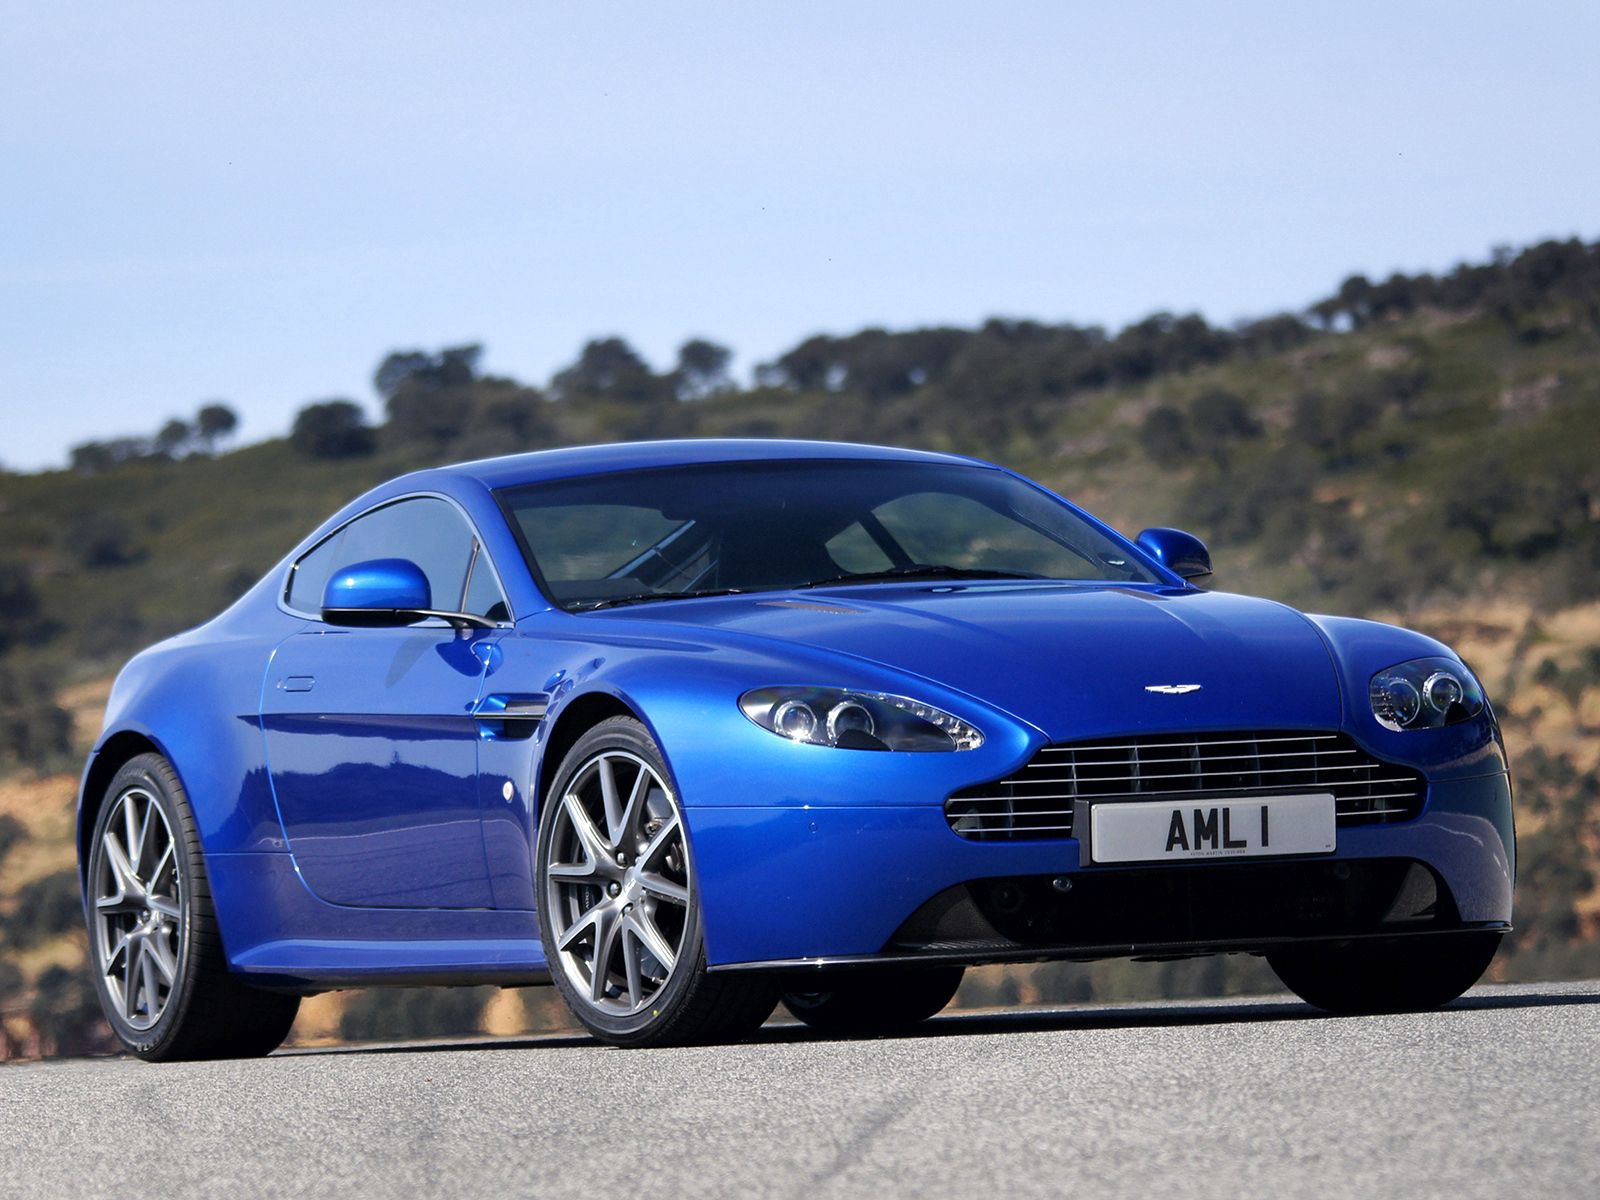 v8, front view, cars, nature, aston martin, blue, style, 2011, vantage HD wallpaper